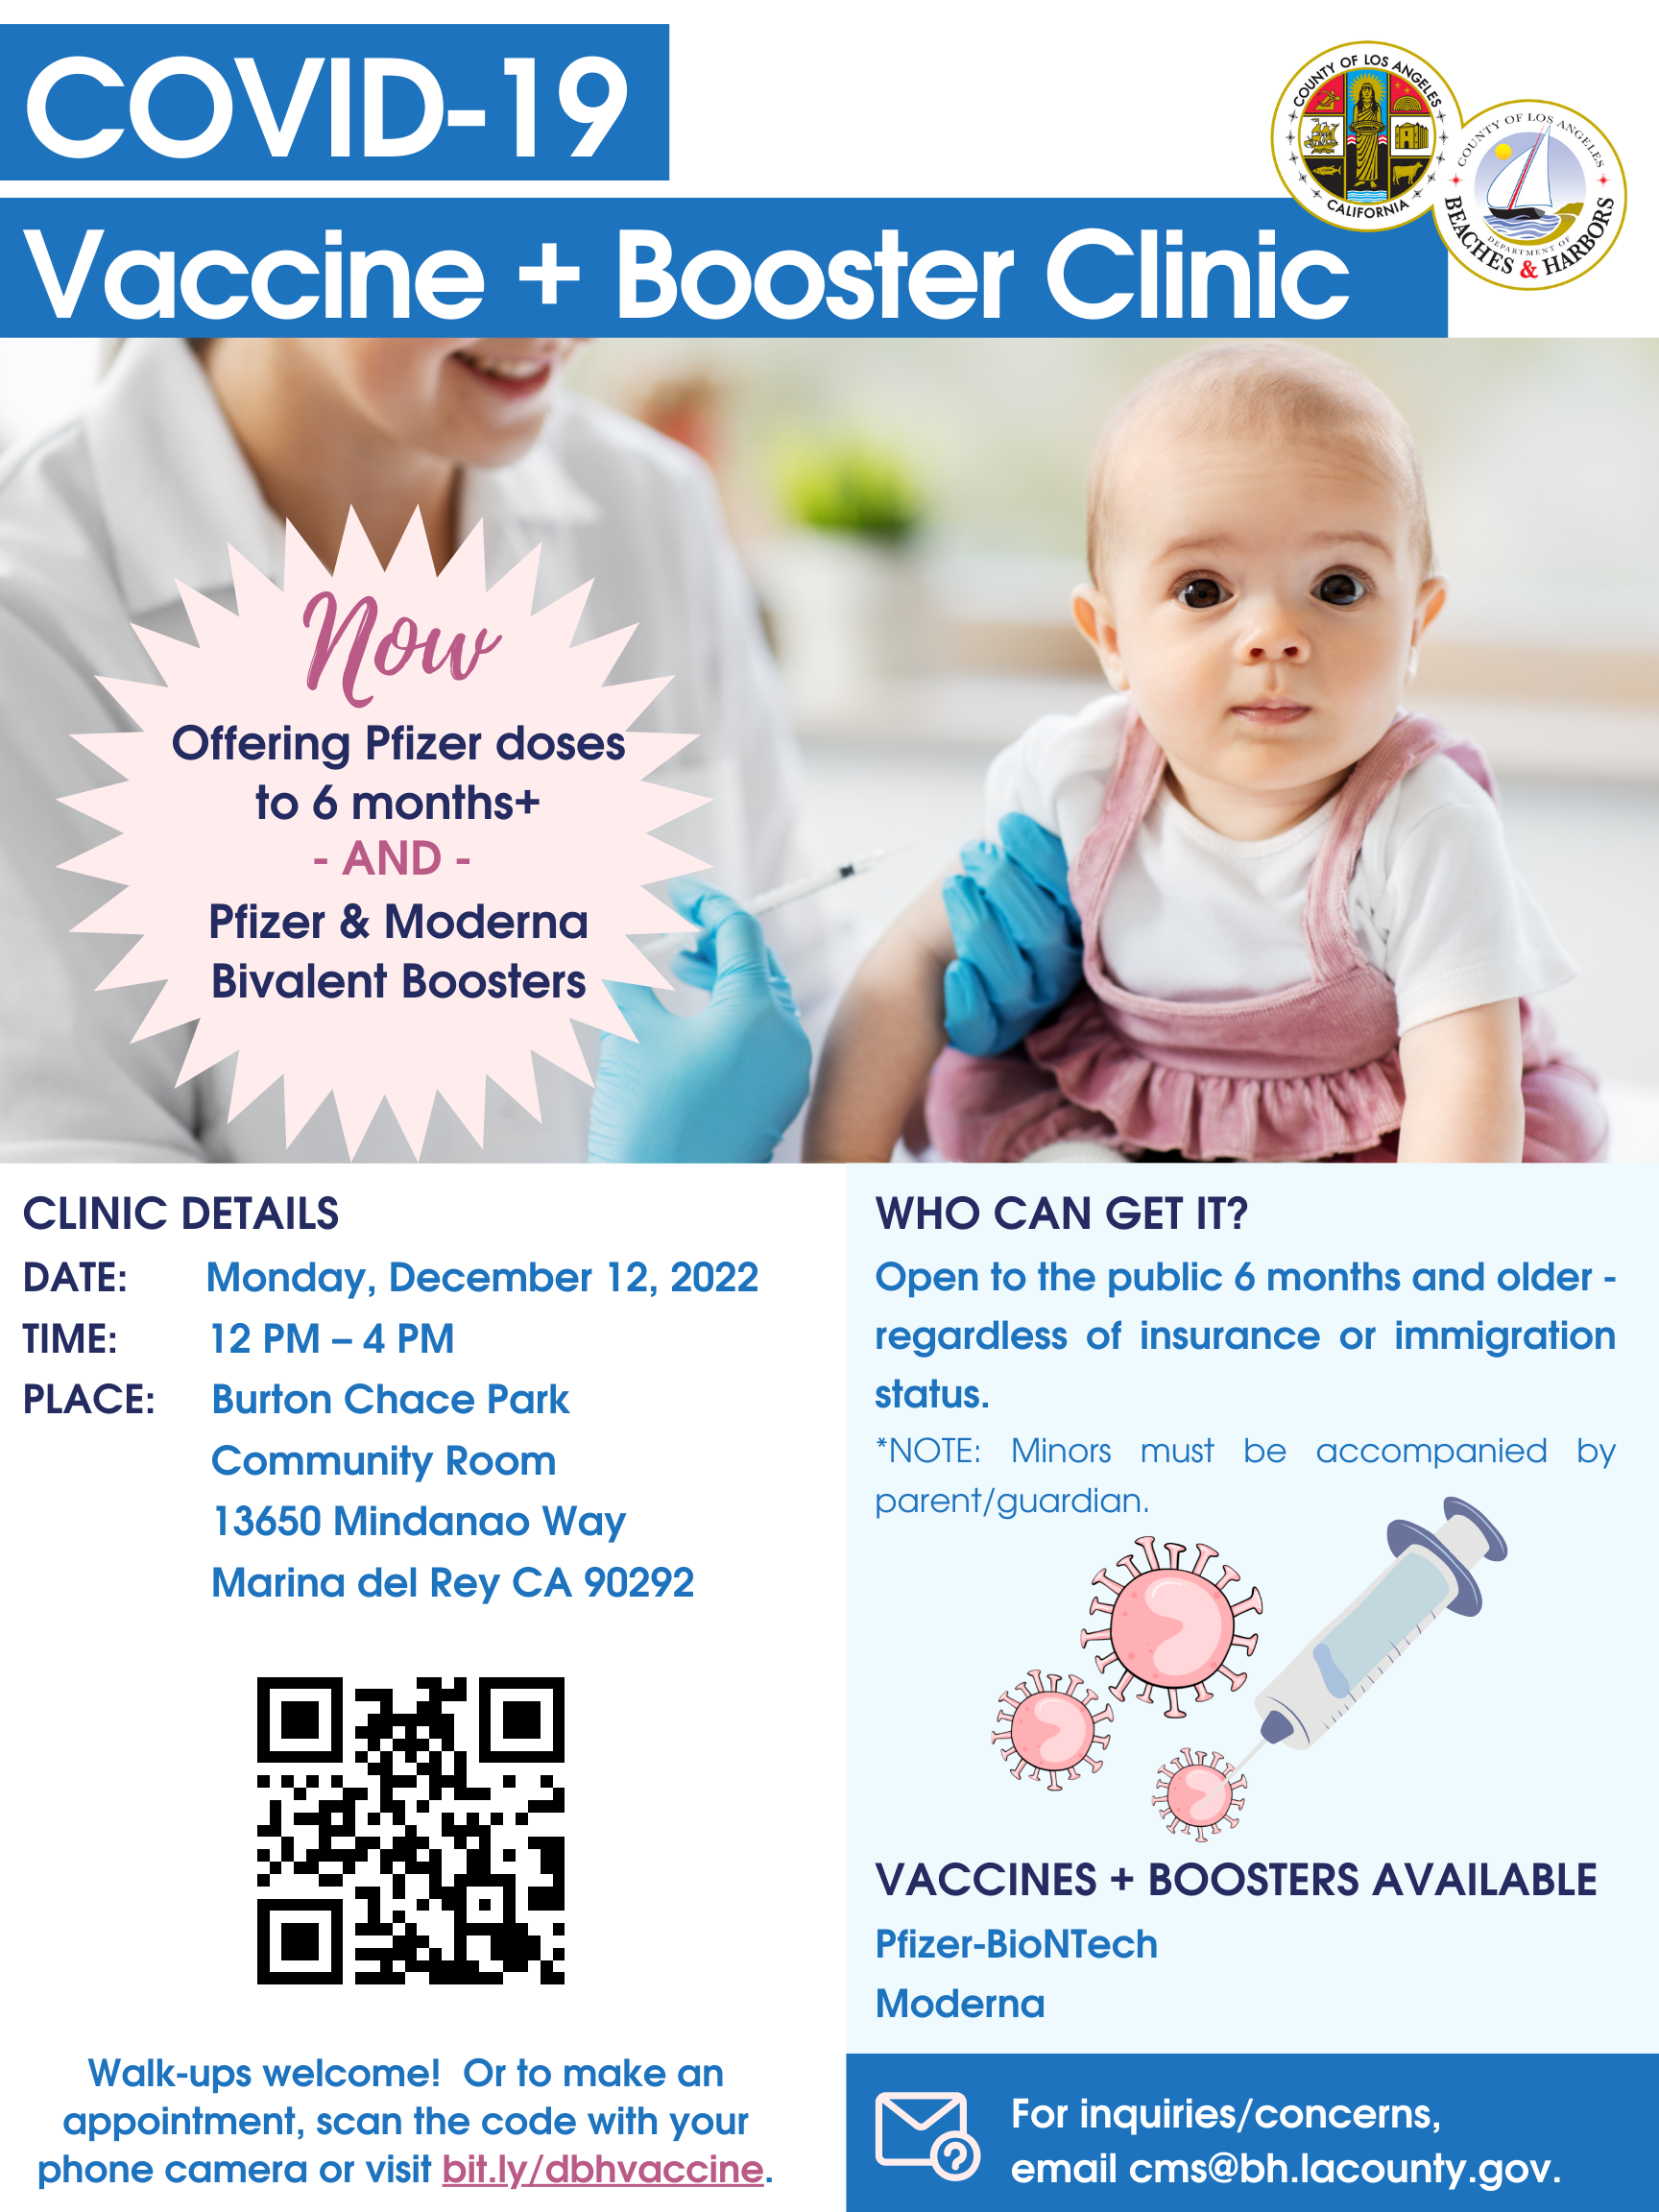 COVID-19 Vaccine and Booster Clinic (December 12)